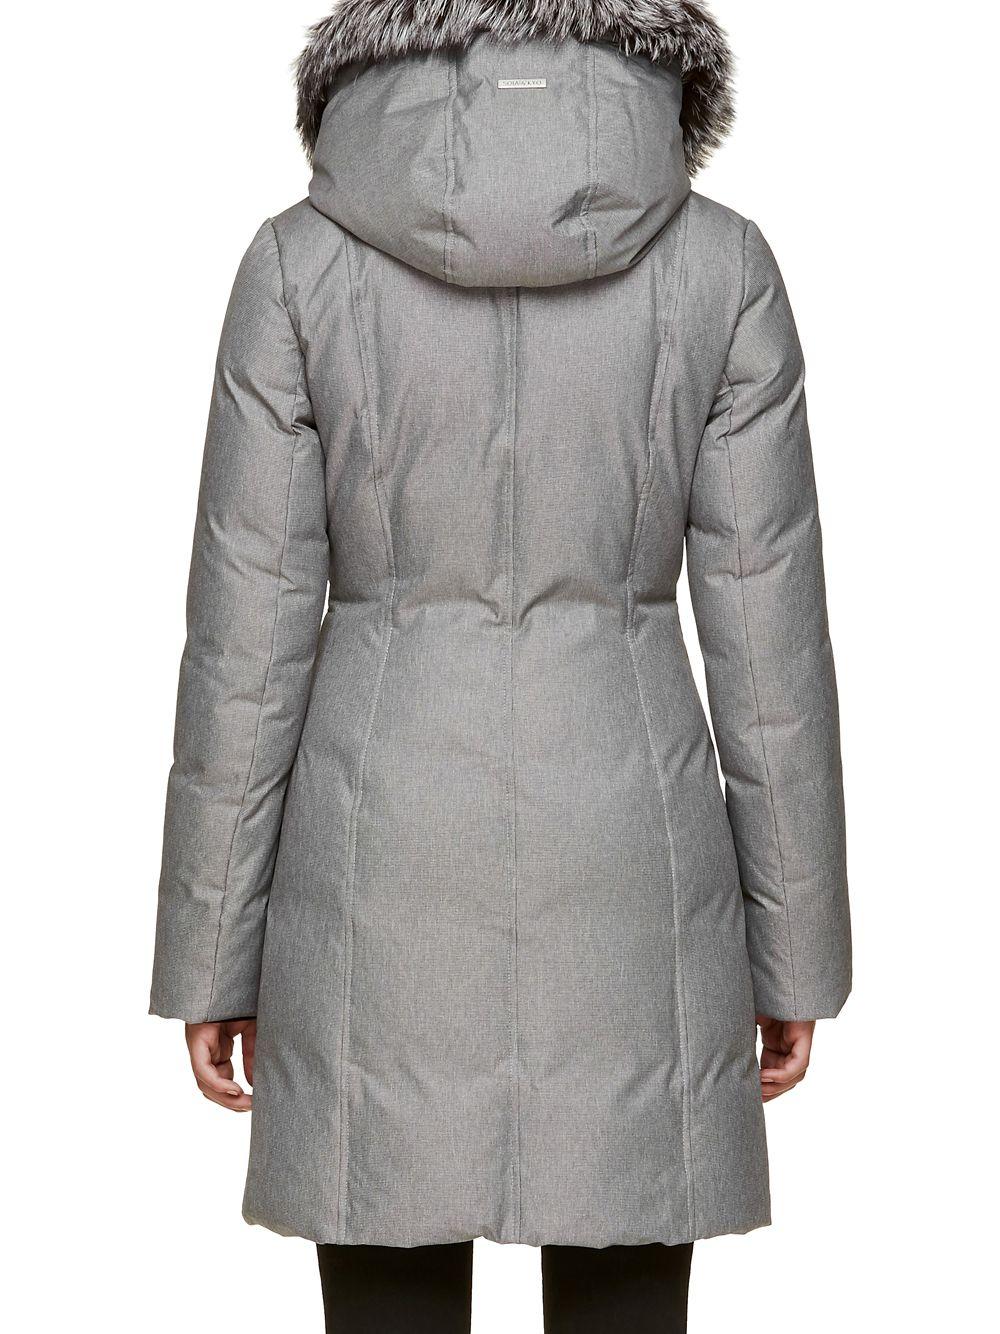 SOIA & KYO Quilted Christy Jacket With Silver Faux Fur Hood in Ash ...